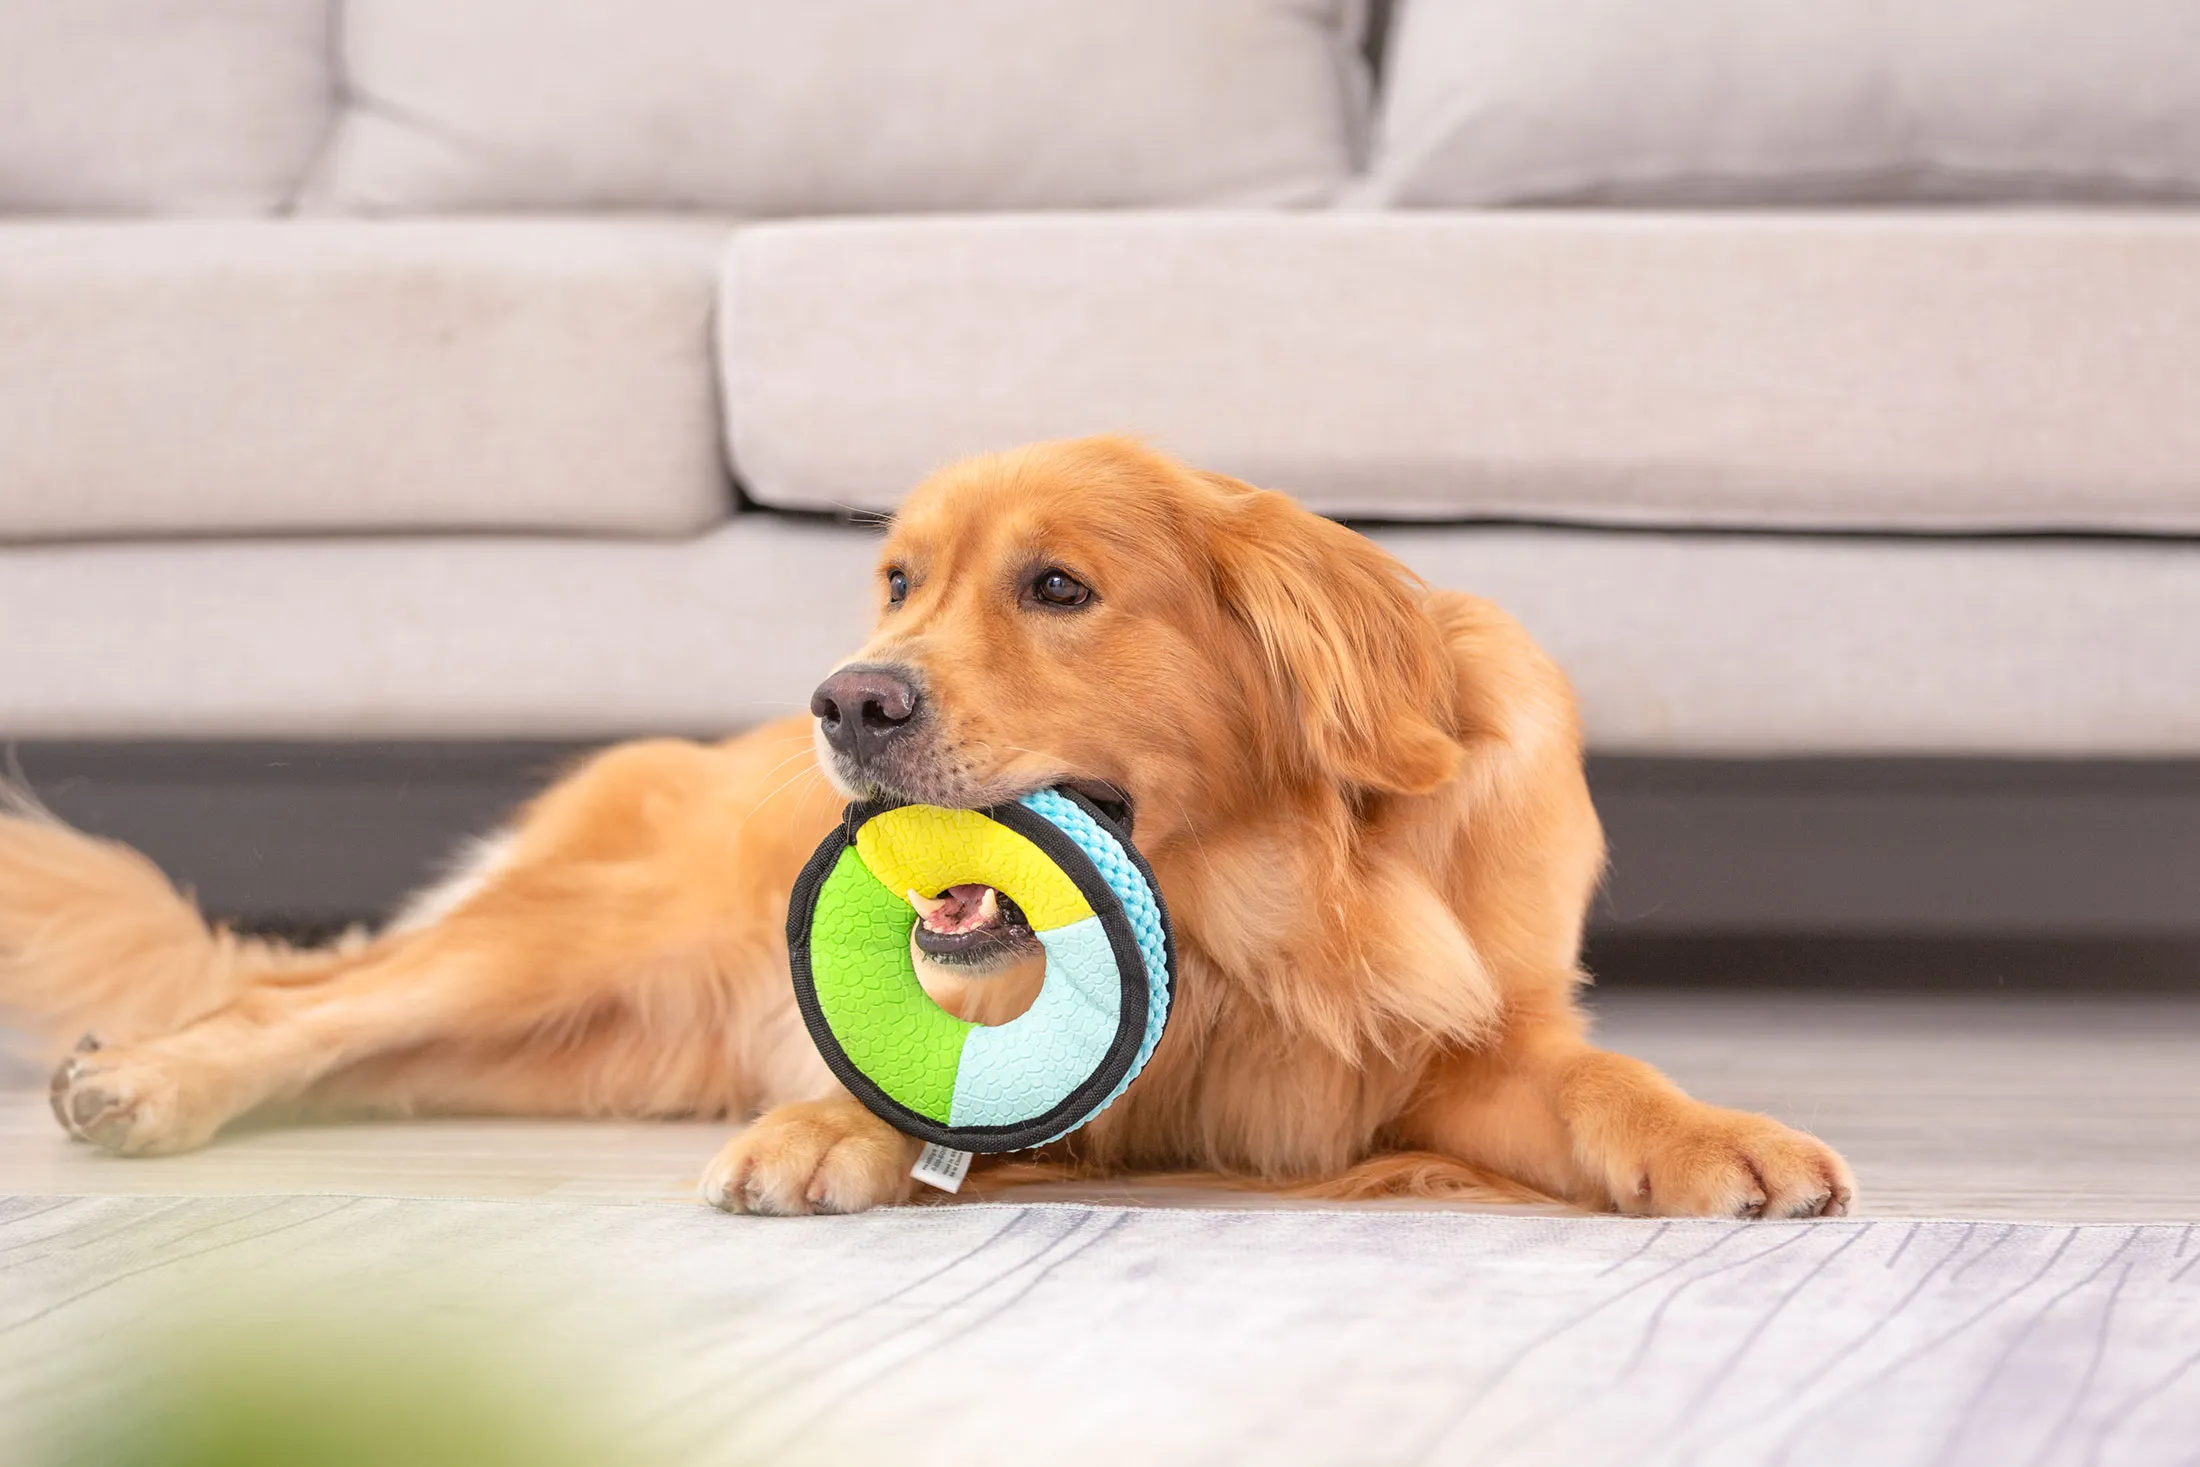 How to Choose Toys for a Happier and More Excited Pet?